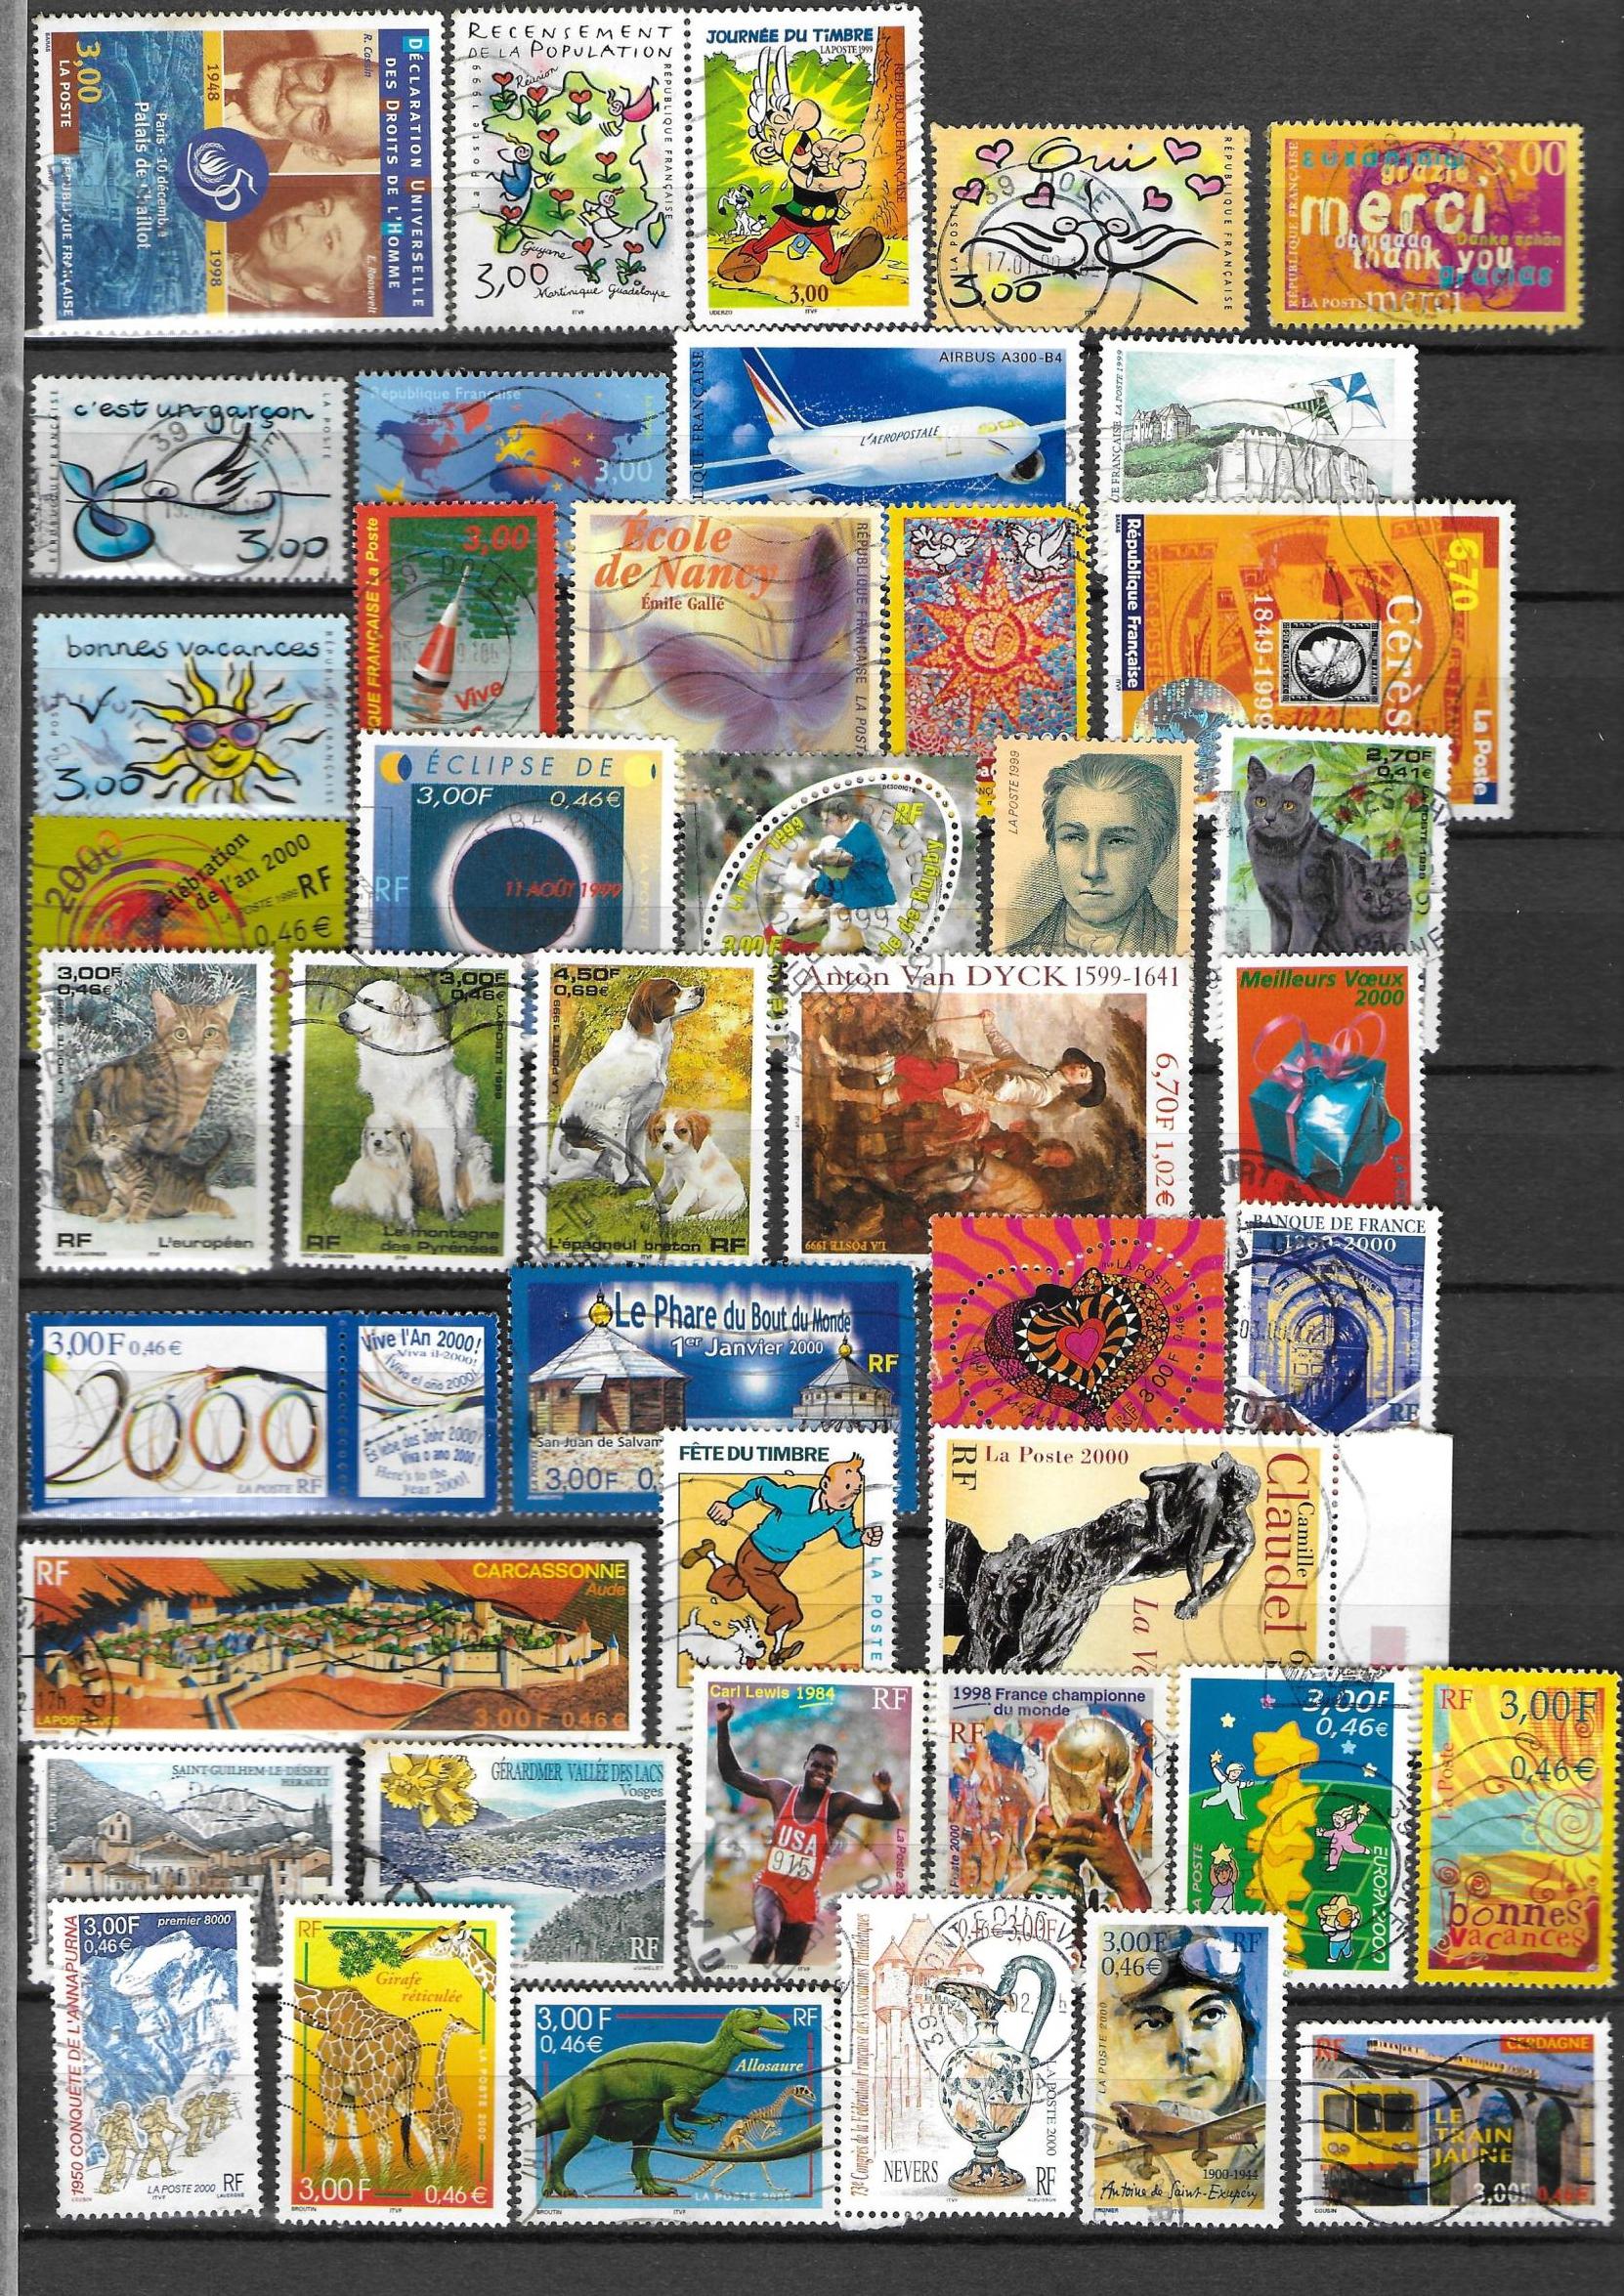 Timbres France 7 - Copie.jpg